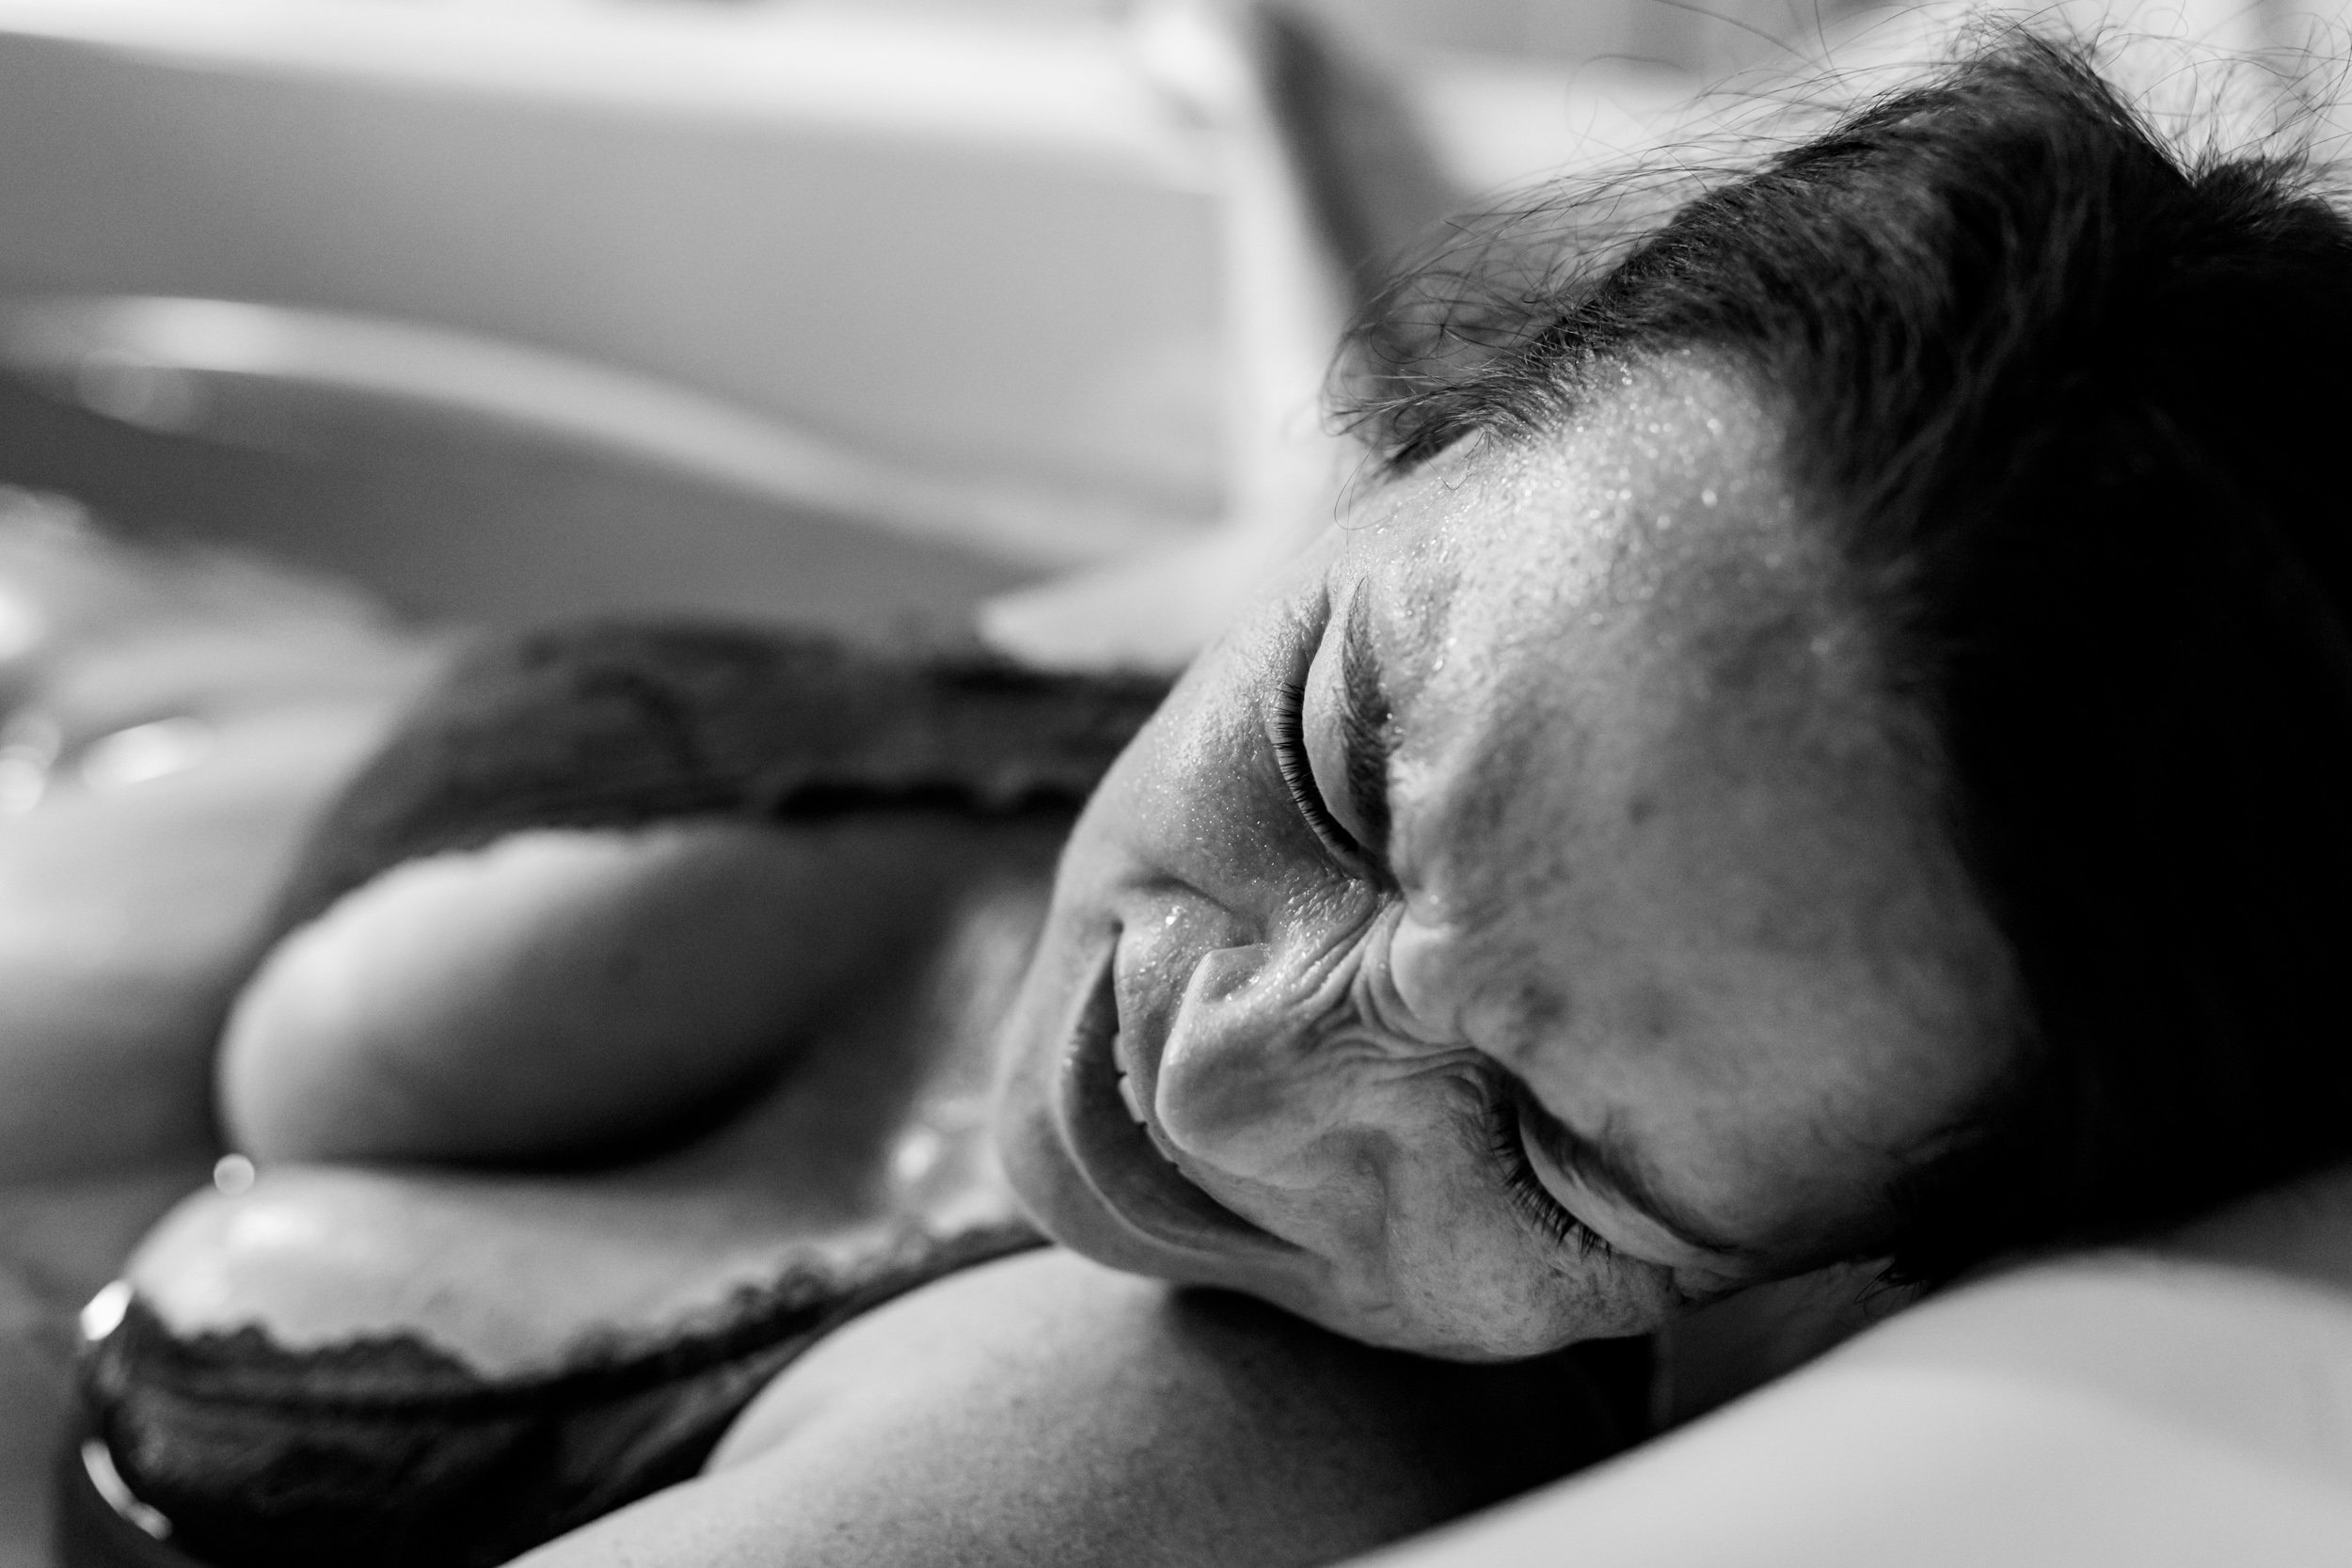 birth mom with strain on her face during labor